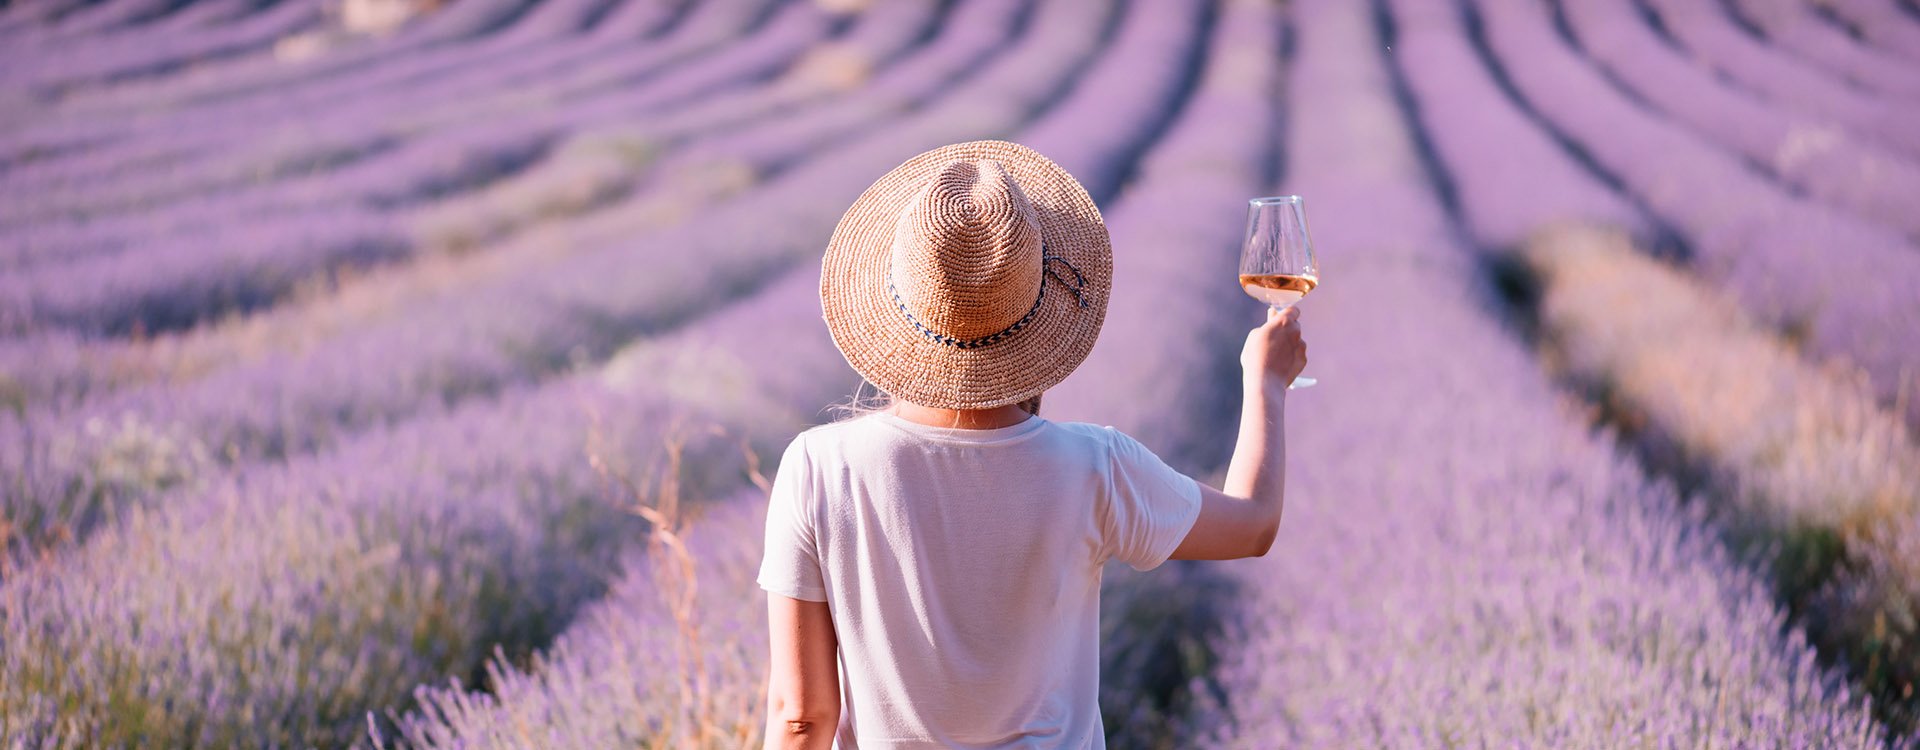 Young women drink rose wine in sunset lavender field